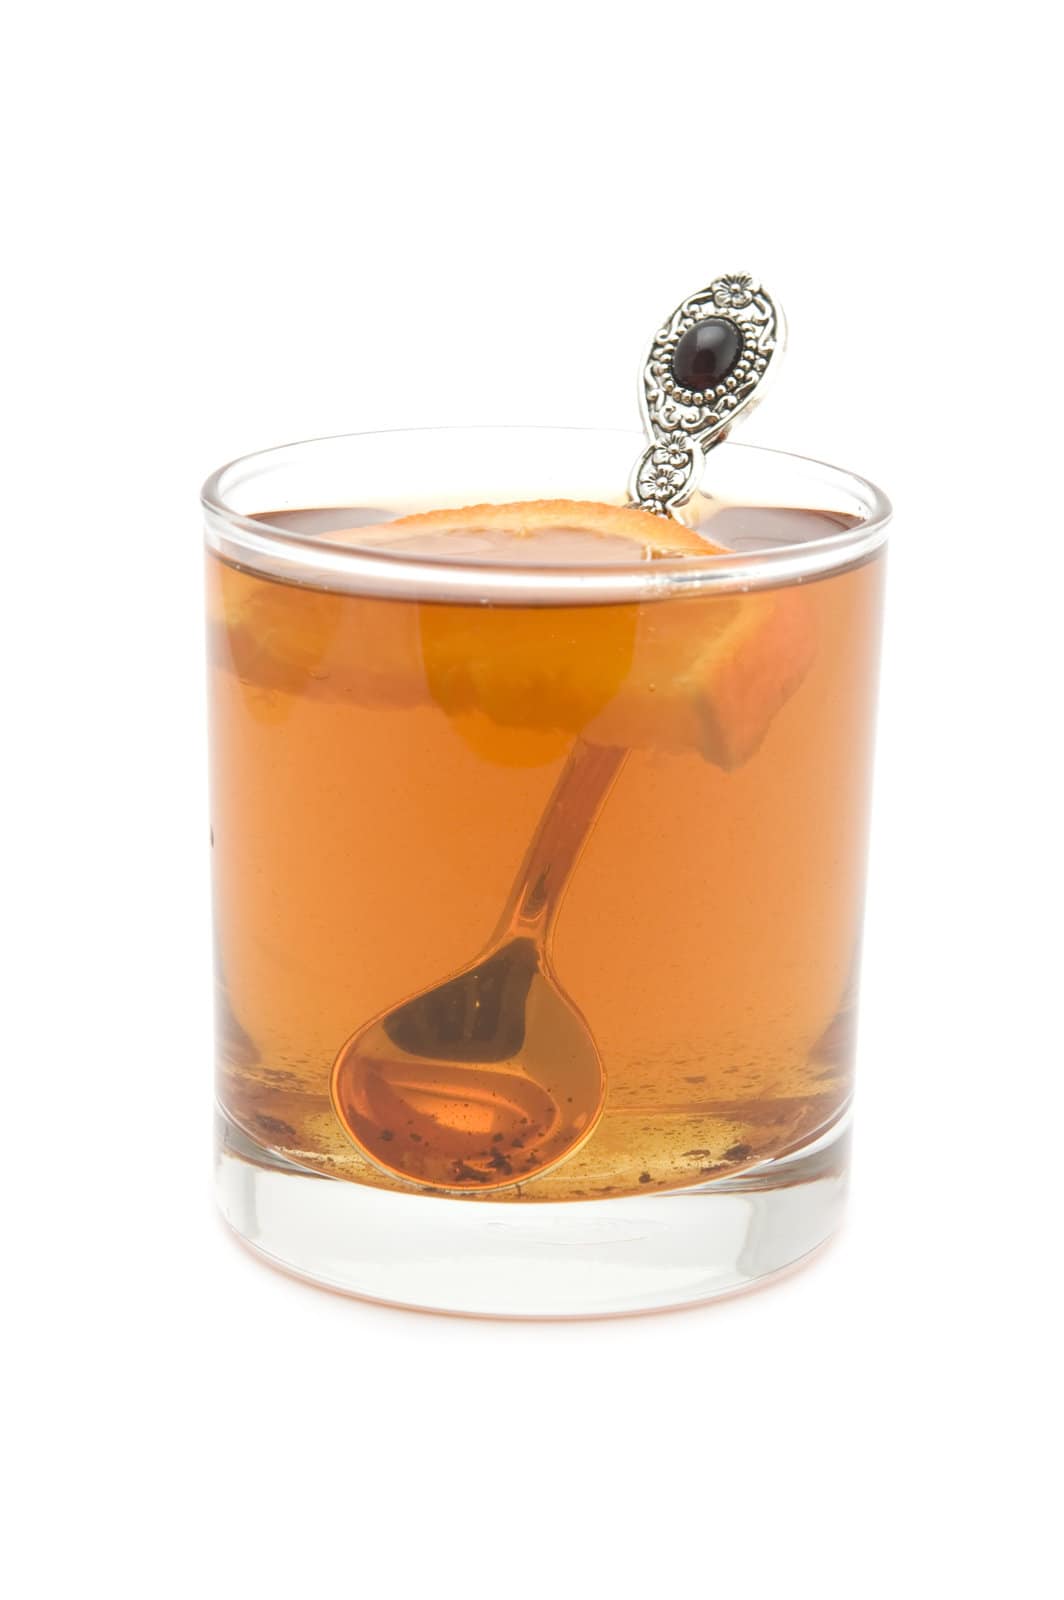 Rum Old Fashioned cocktail